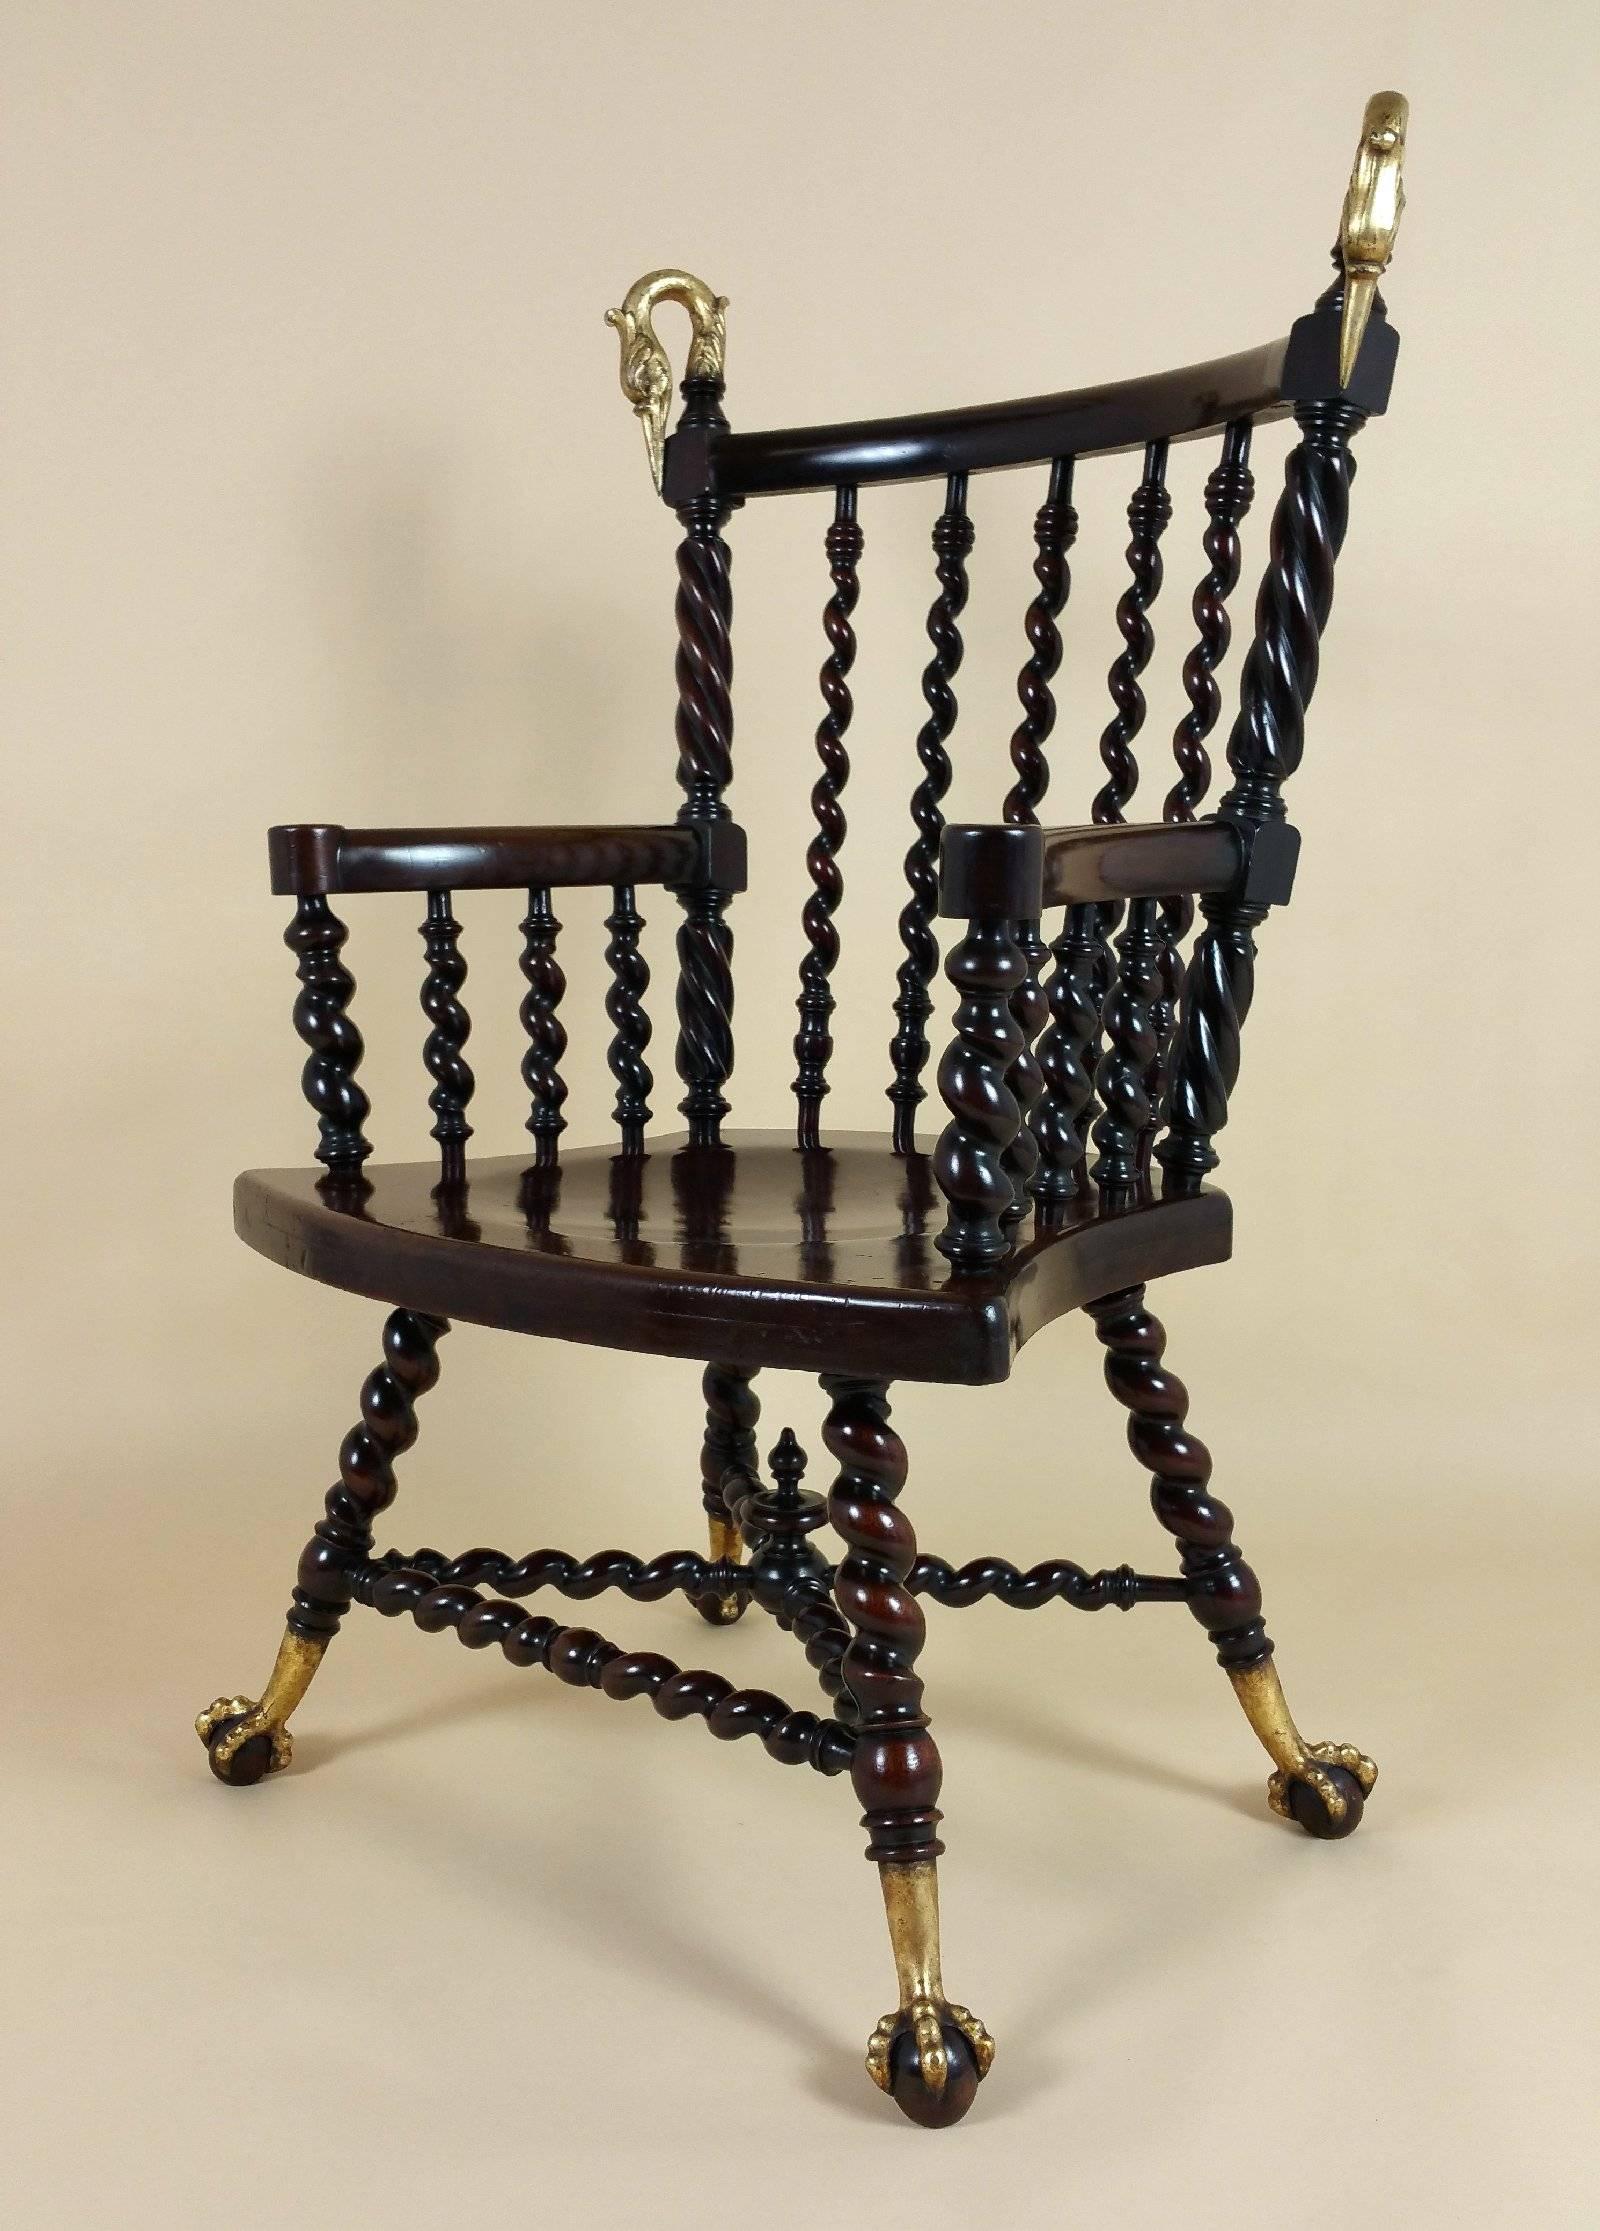 This truly superb and stunning American mahogany armchair features barley twist supports and back slats with a recessed seat. The chair showcases two lovely gilt bronze swans, one on each side of the chair back, and wonderfully curved arm supports.